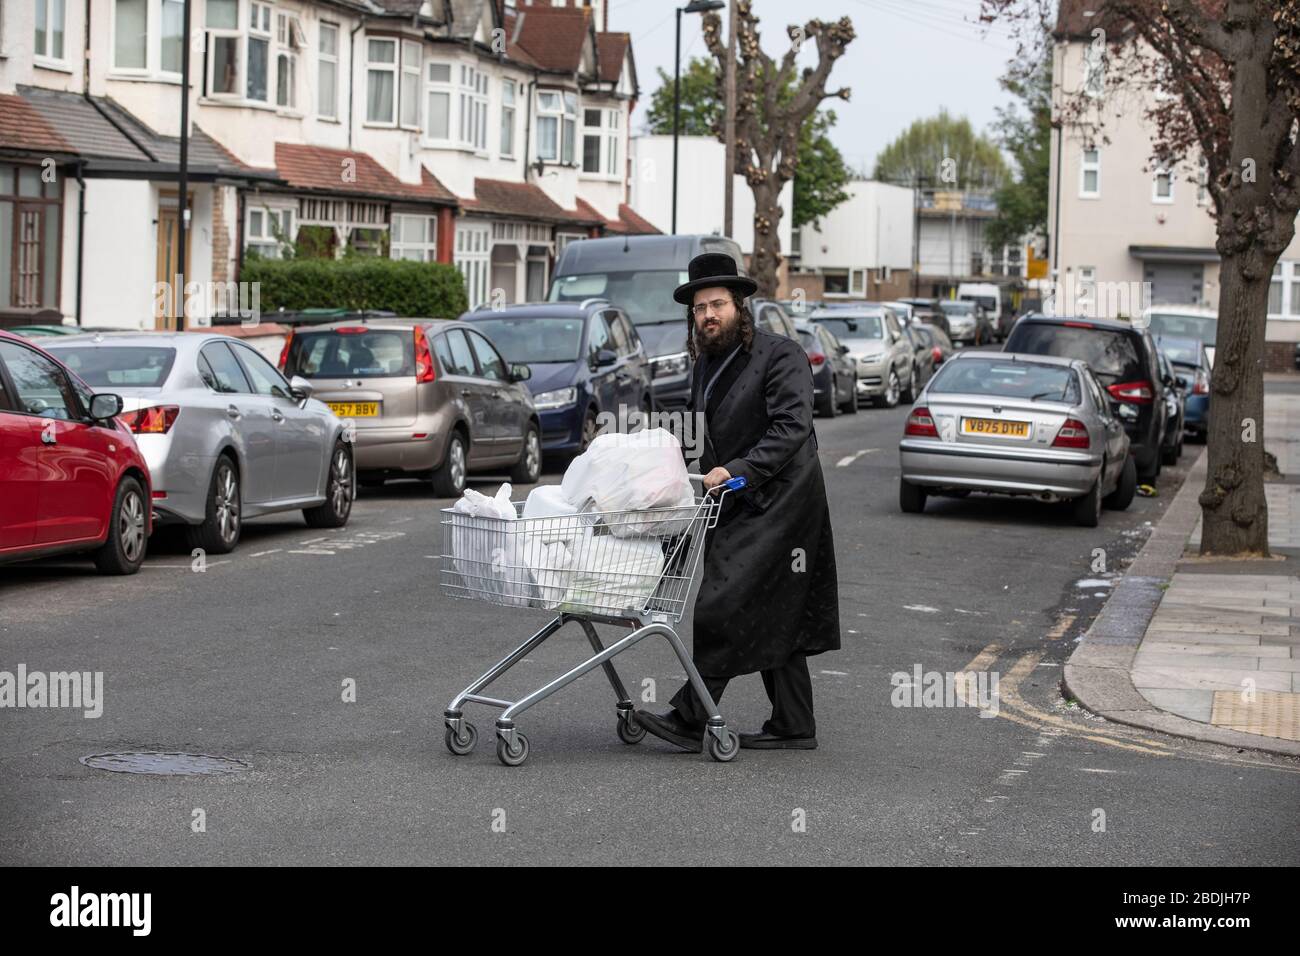 Ultra-Orthodox Jew in the Jewish Community of Stamford Hill with provisions ahead of the Passover celebrations during the COVID-19 lockdown, London Stock Photo